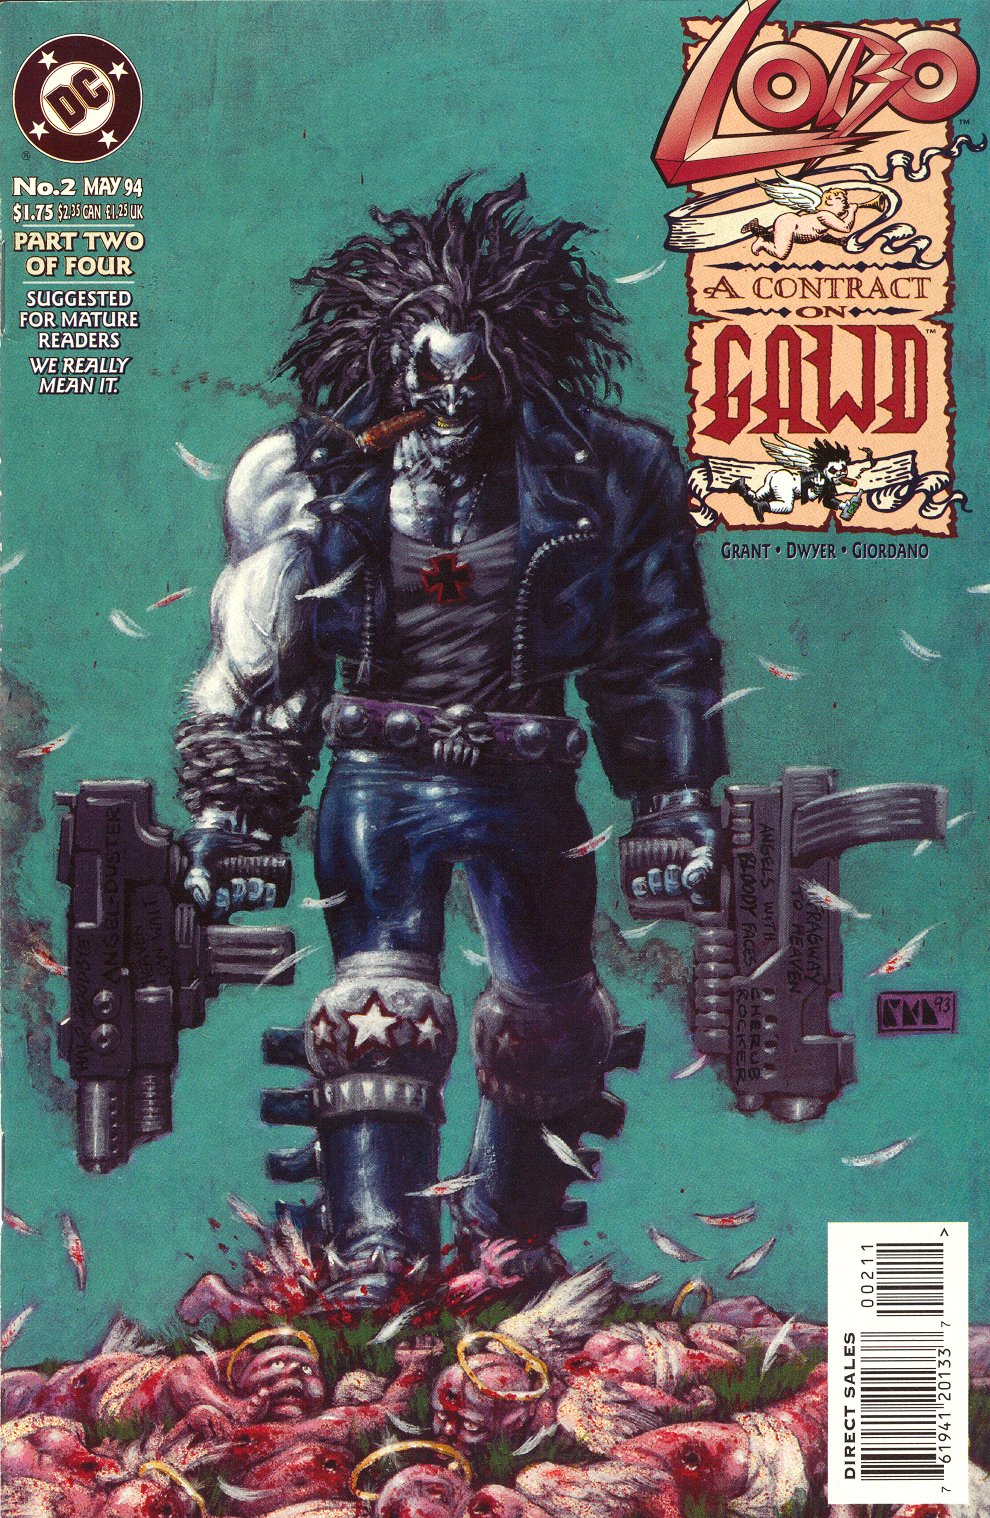 Read online Lobo: A Contract on Gawd comic -  Issue #2 - 1